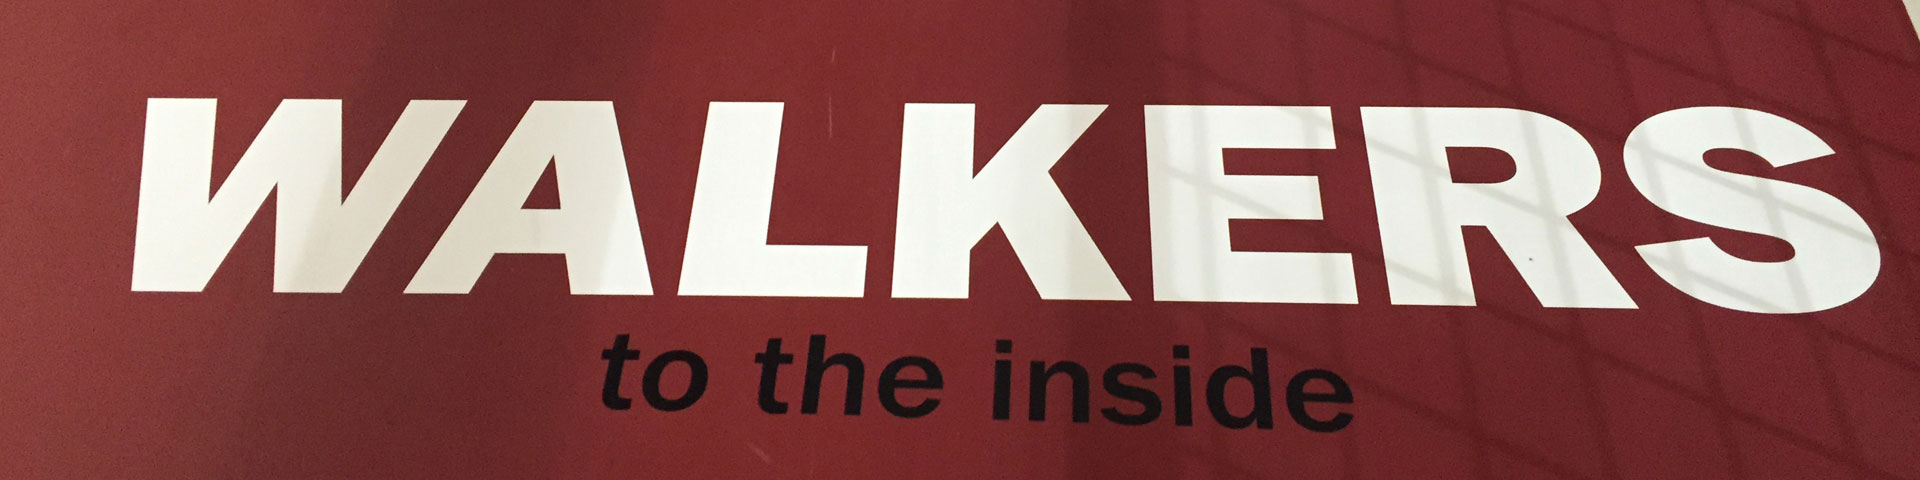 "Walkers: Stay to the Inside" is the text that appears on this red indoor running track.